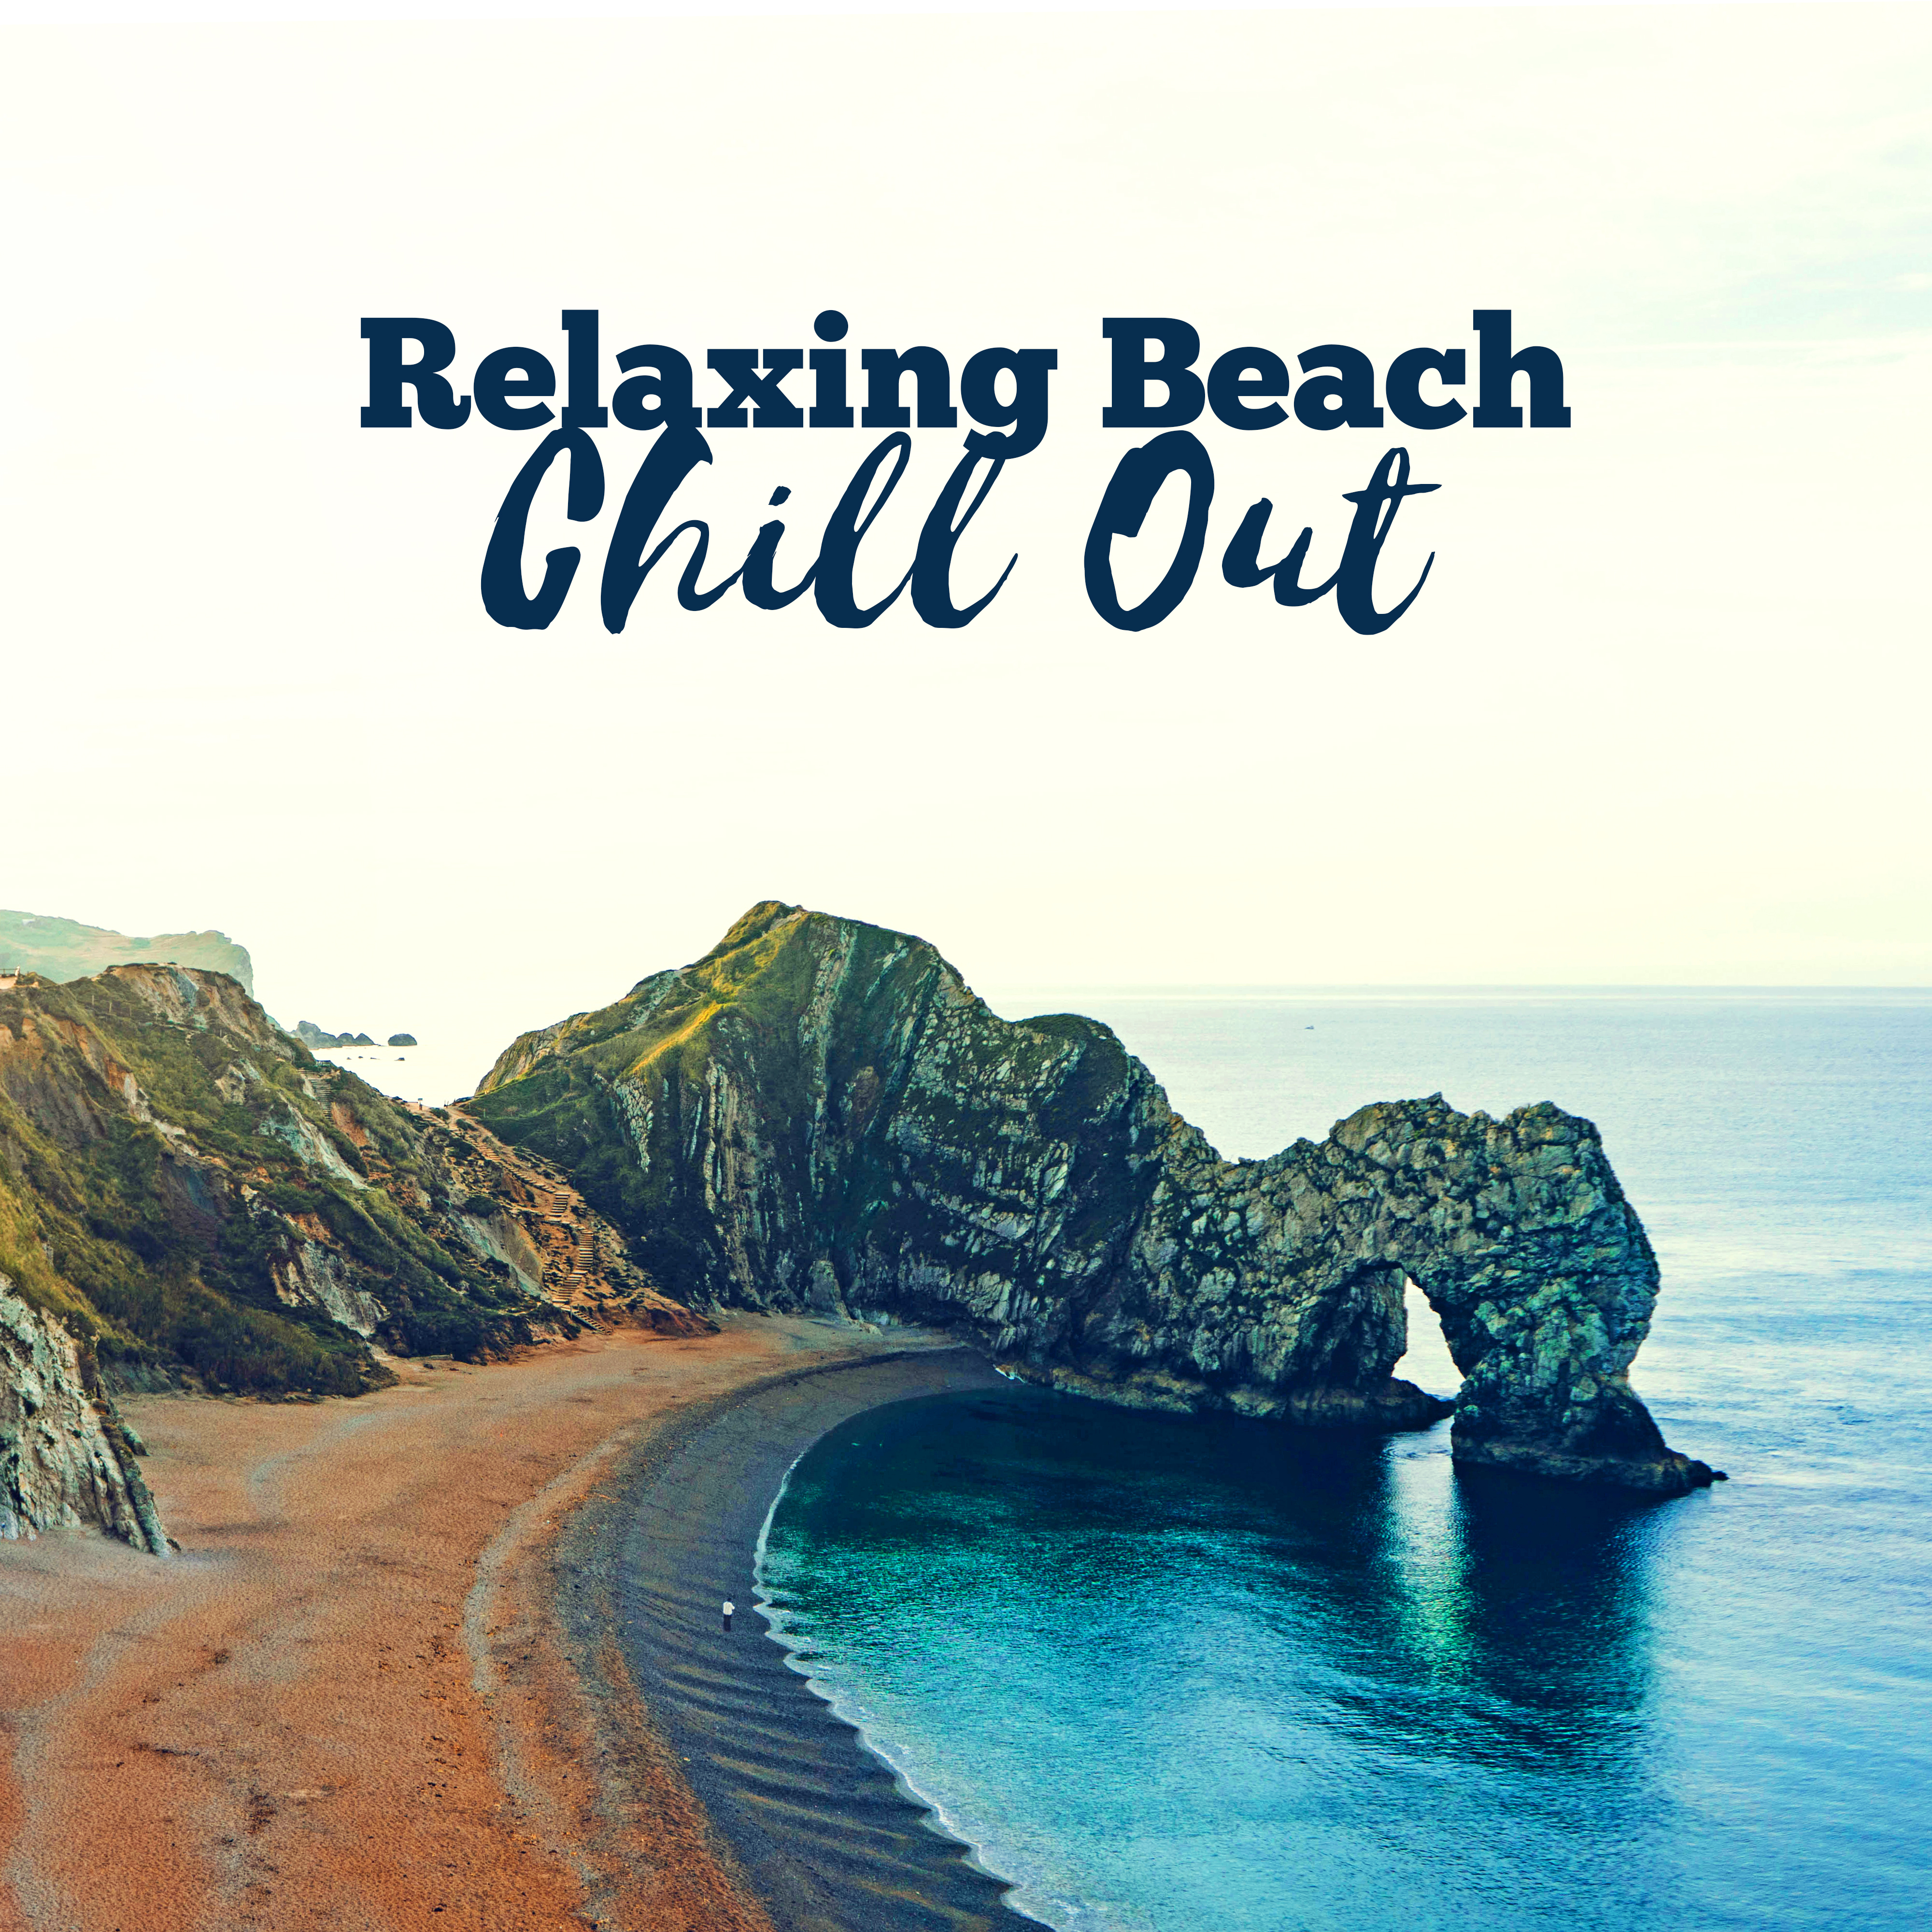 Relaxing Beach Chill Out – Summer Songs, Easy Listening, Peaceful Waves, Stress Relief, Music to Relax